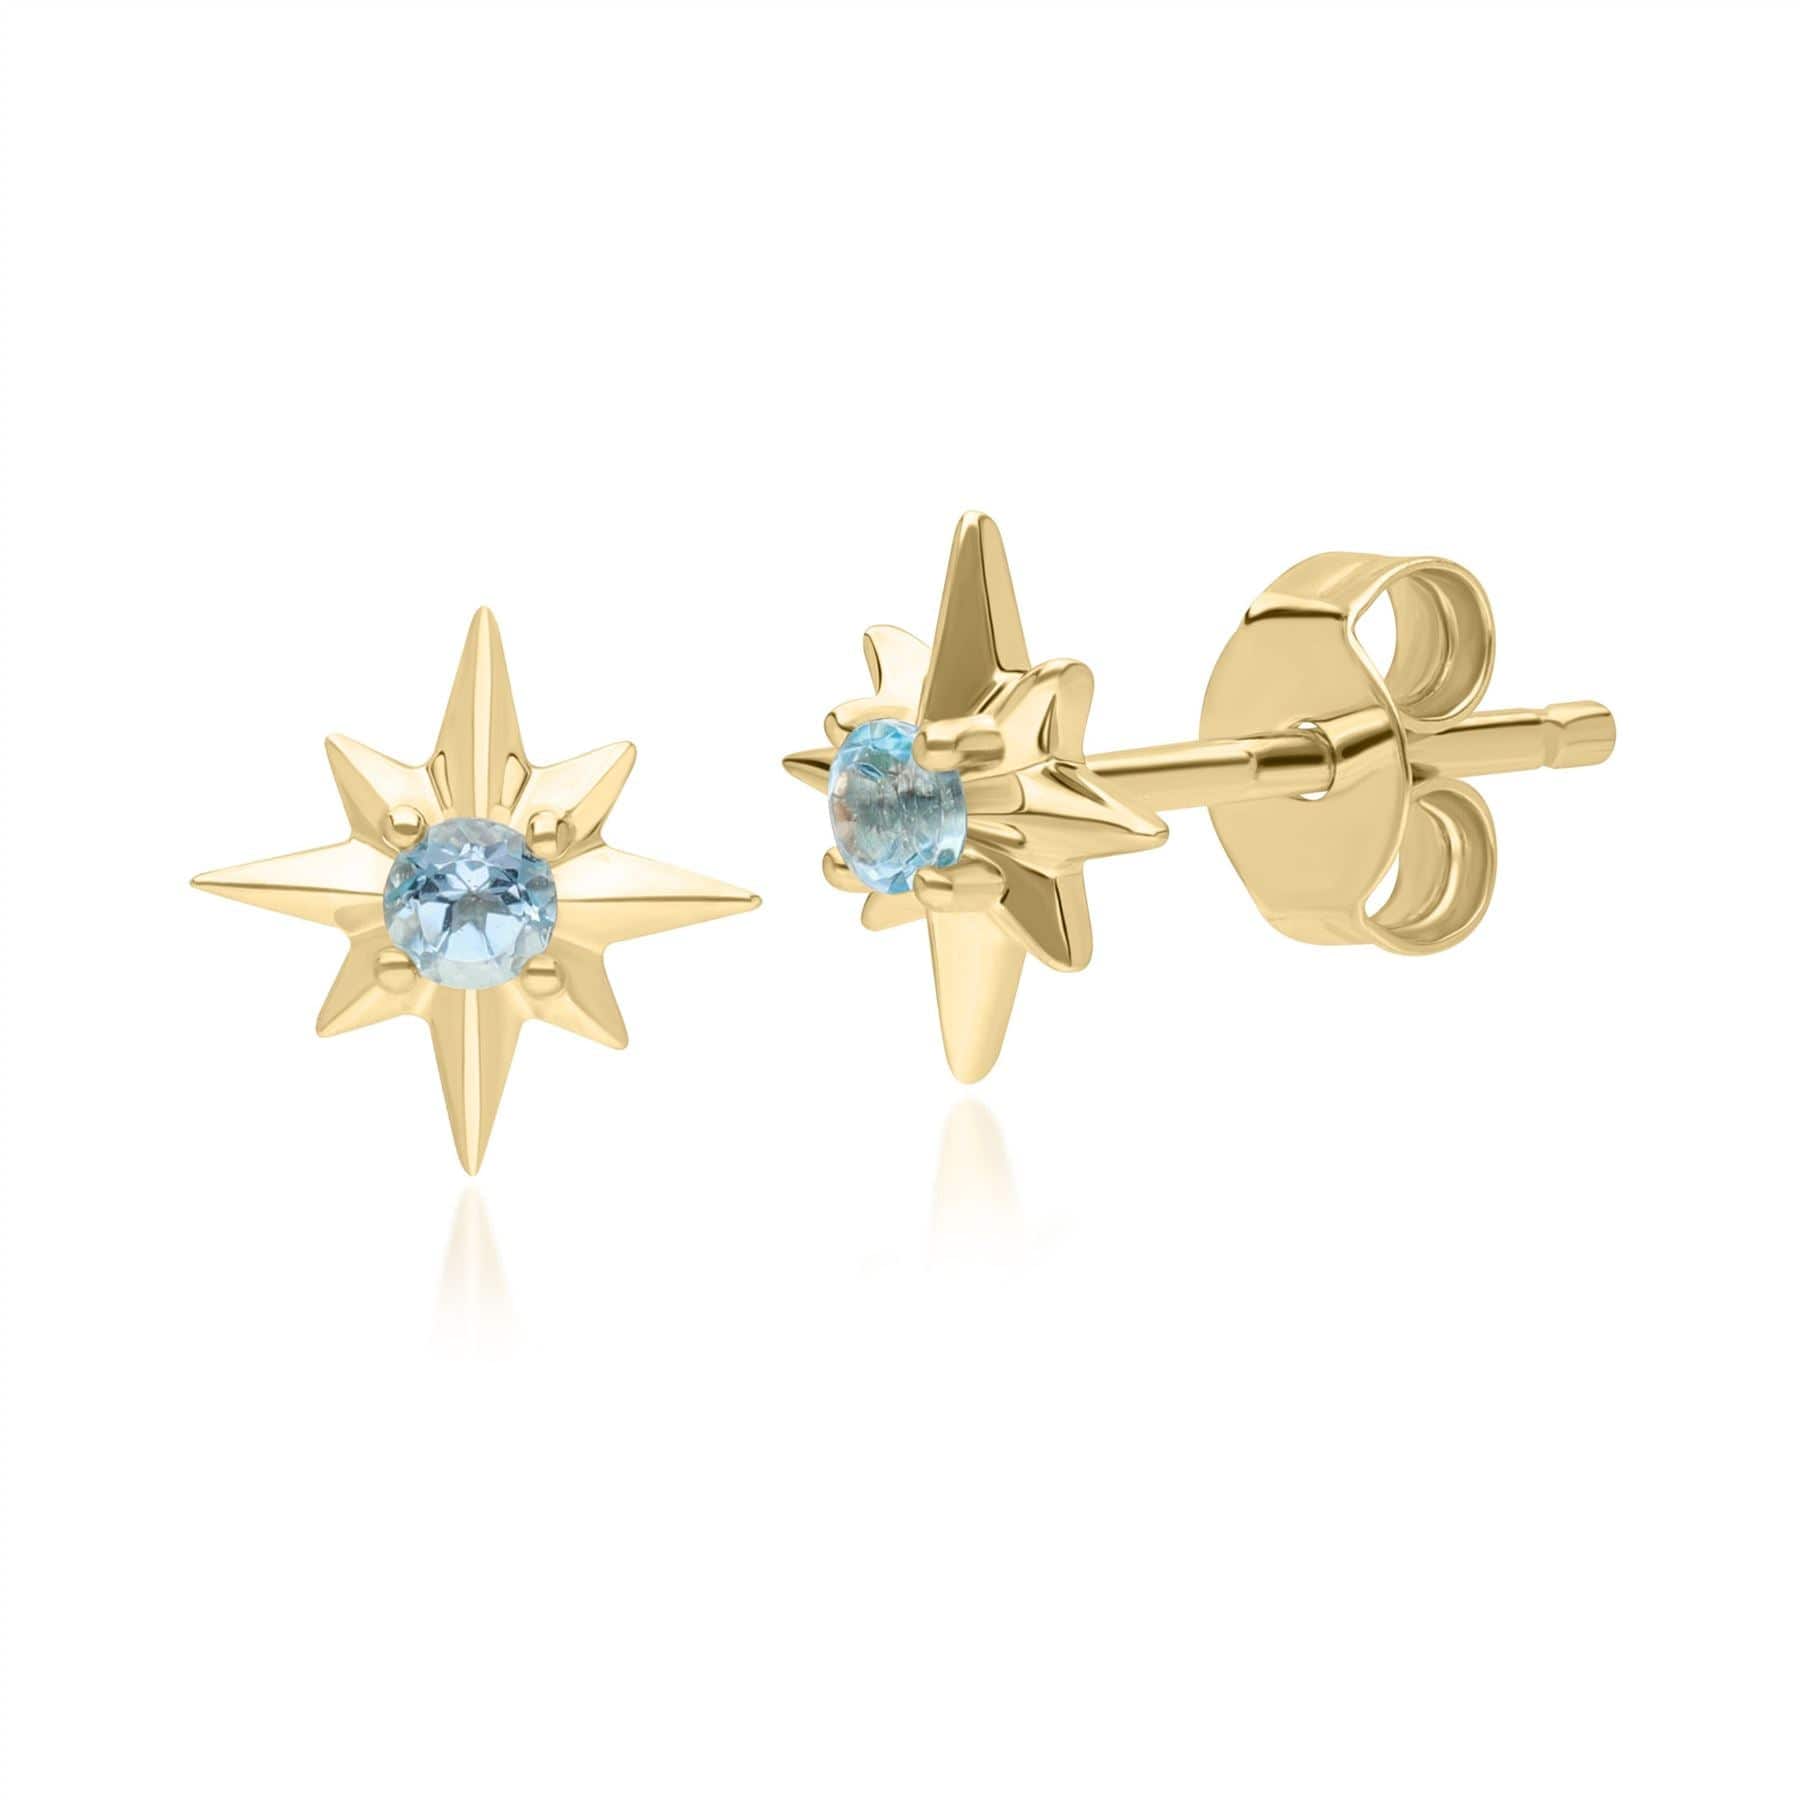 135E1821019 Night Sky Light Swiss Blue Topaz Cabochon Star Stud Earrings in 9ct Yellow Gold Front